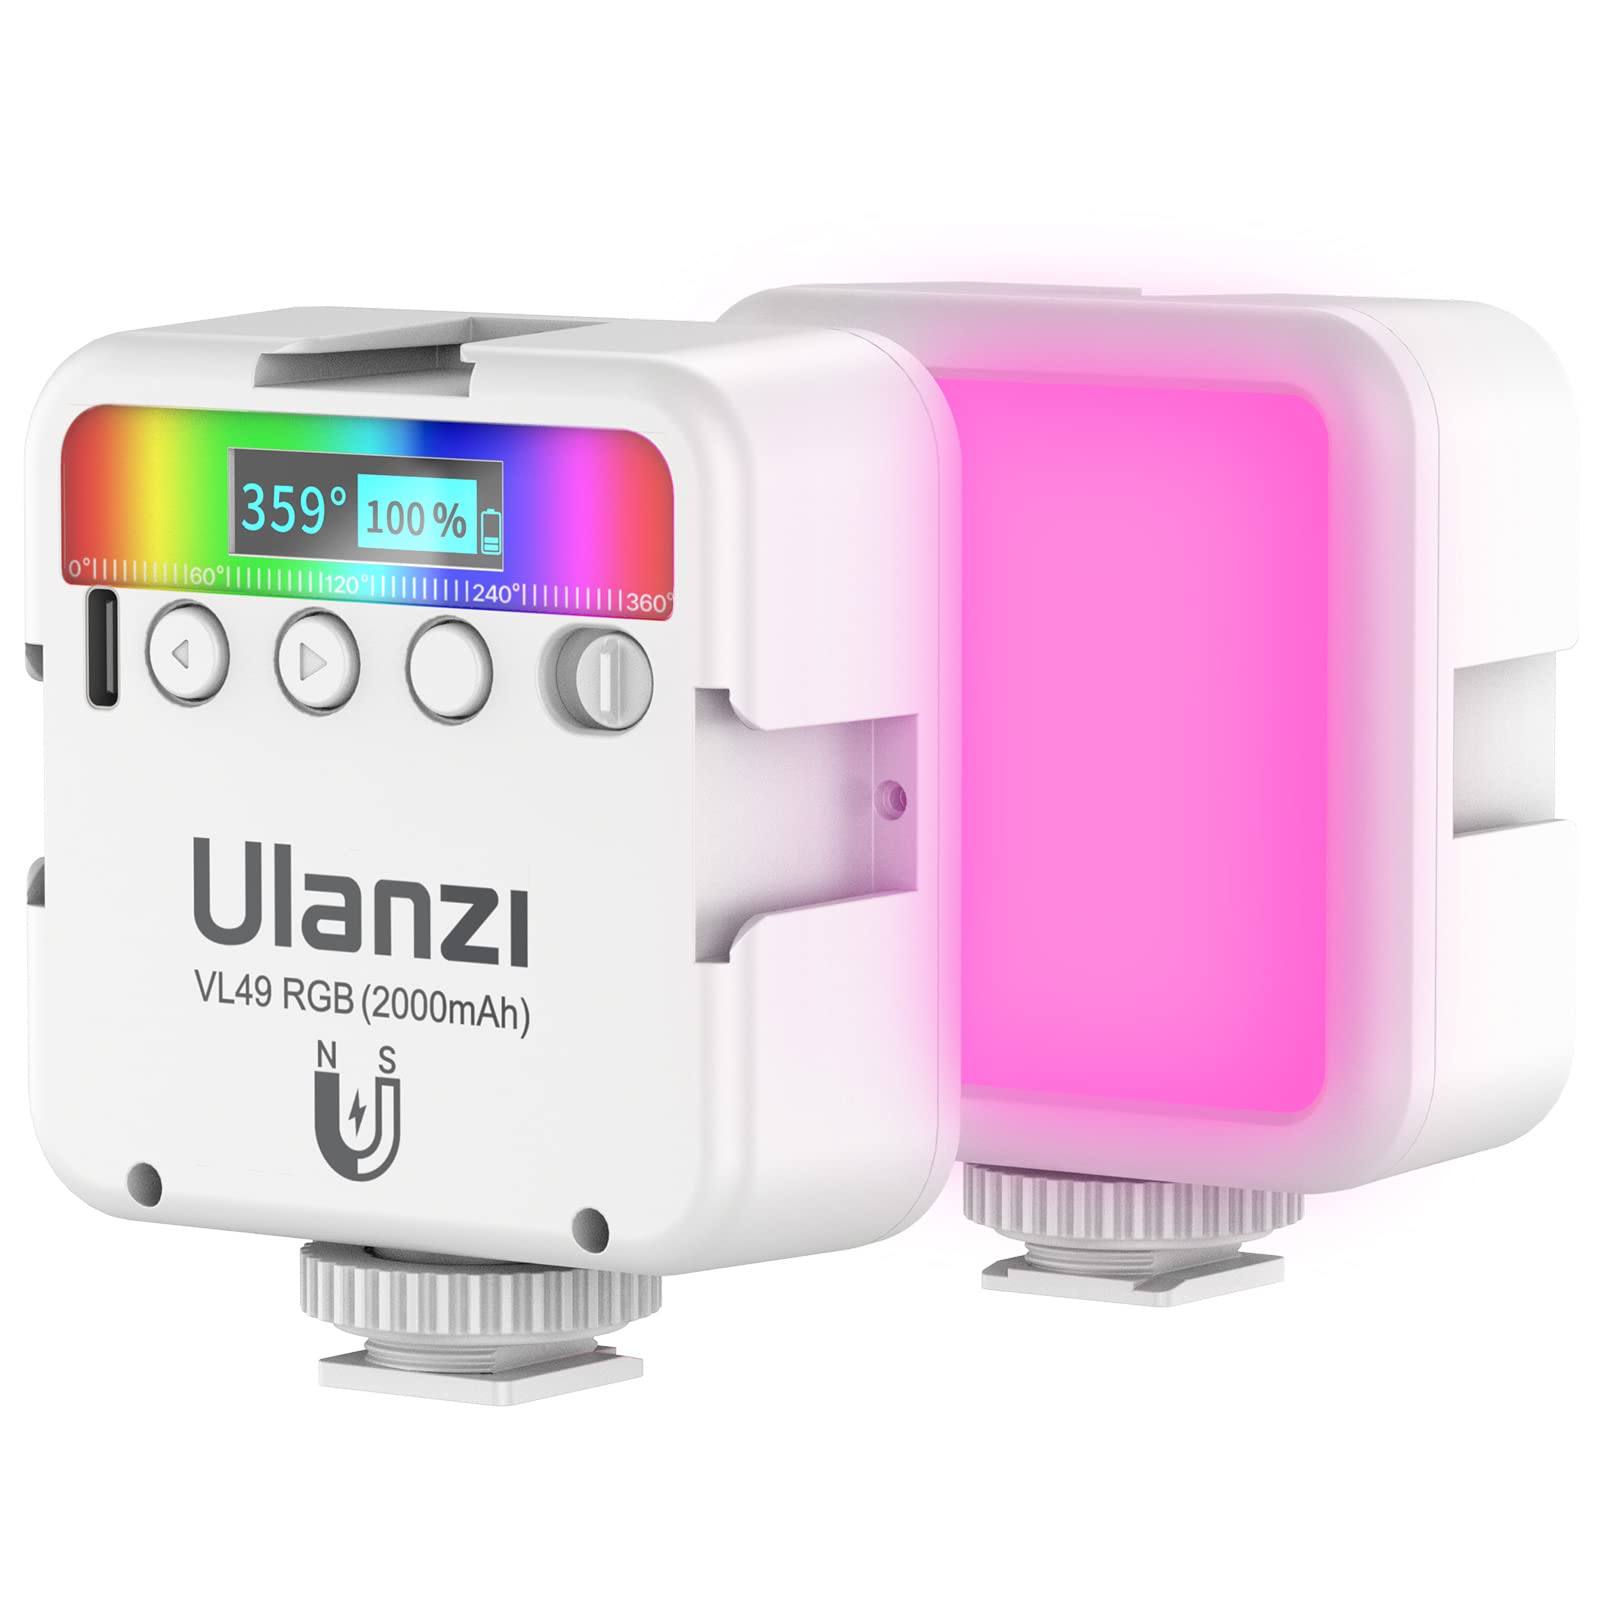 ULANZI VL49 RGB Video Lights White, LED Camera Light 360° Full Color Portable Photography Lighting w 3 Cold Shoe, 2000mAh Rechargeable CRI 95+ 2500-9000K Lamp Support Magnetic Attraction